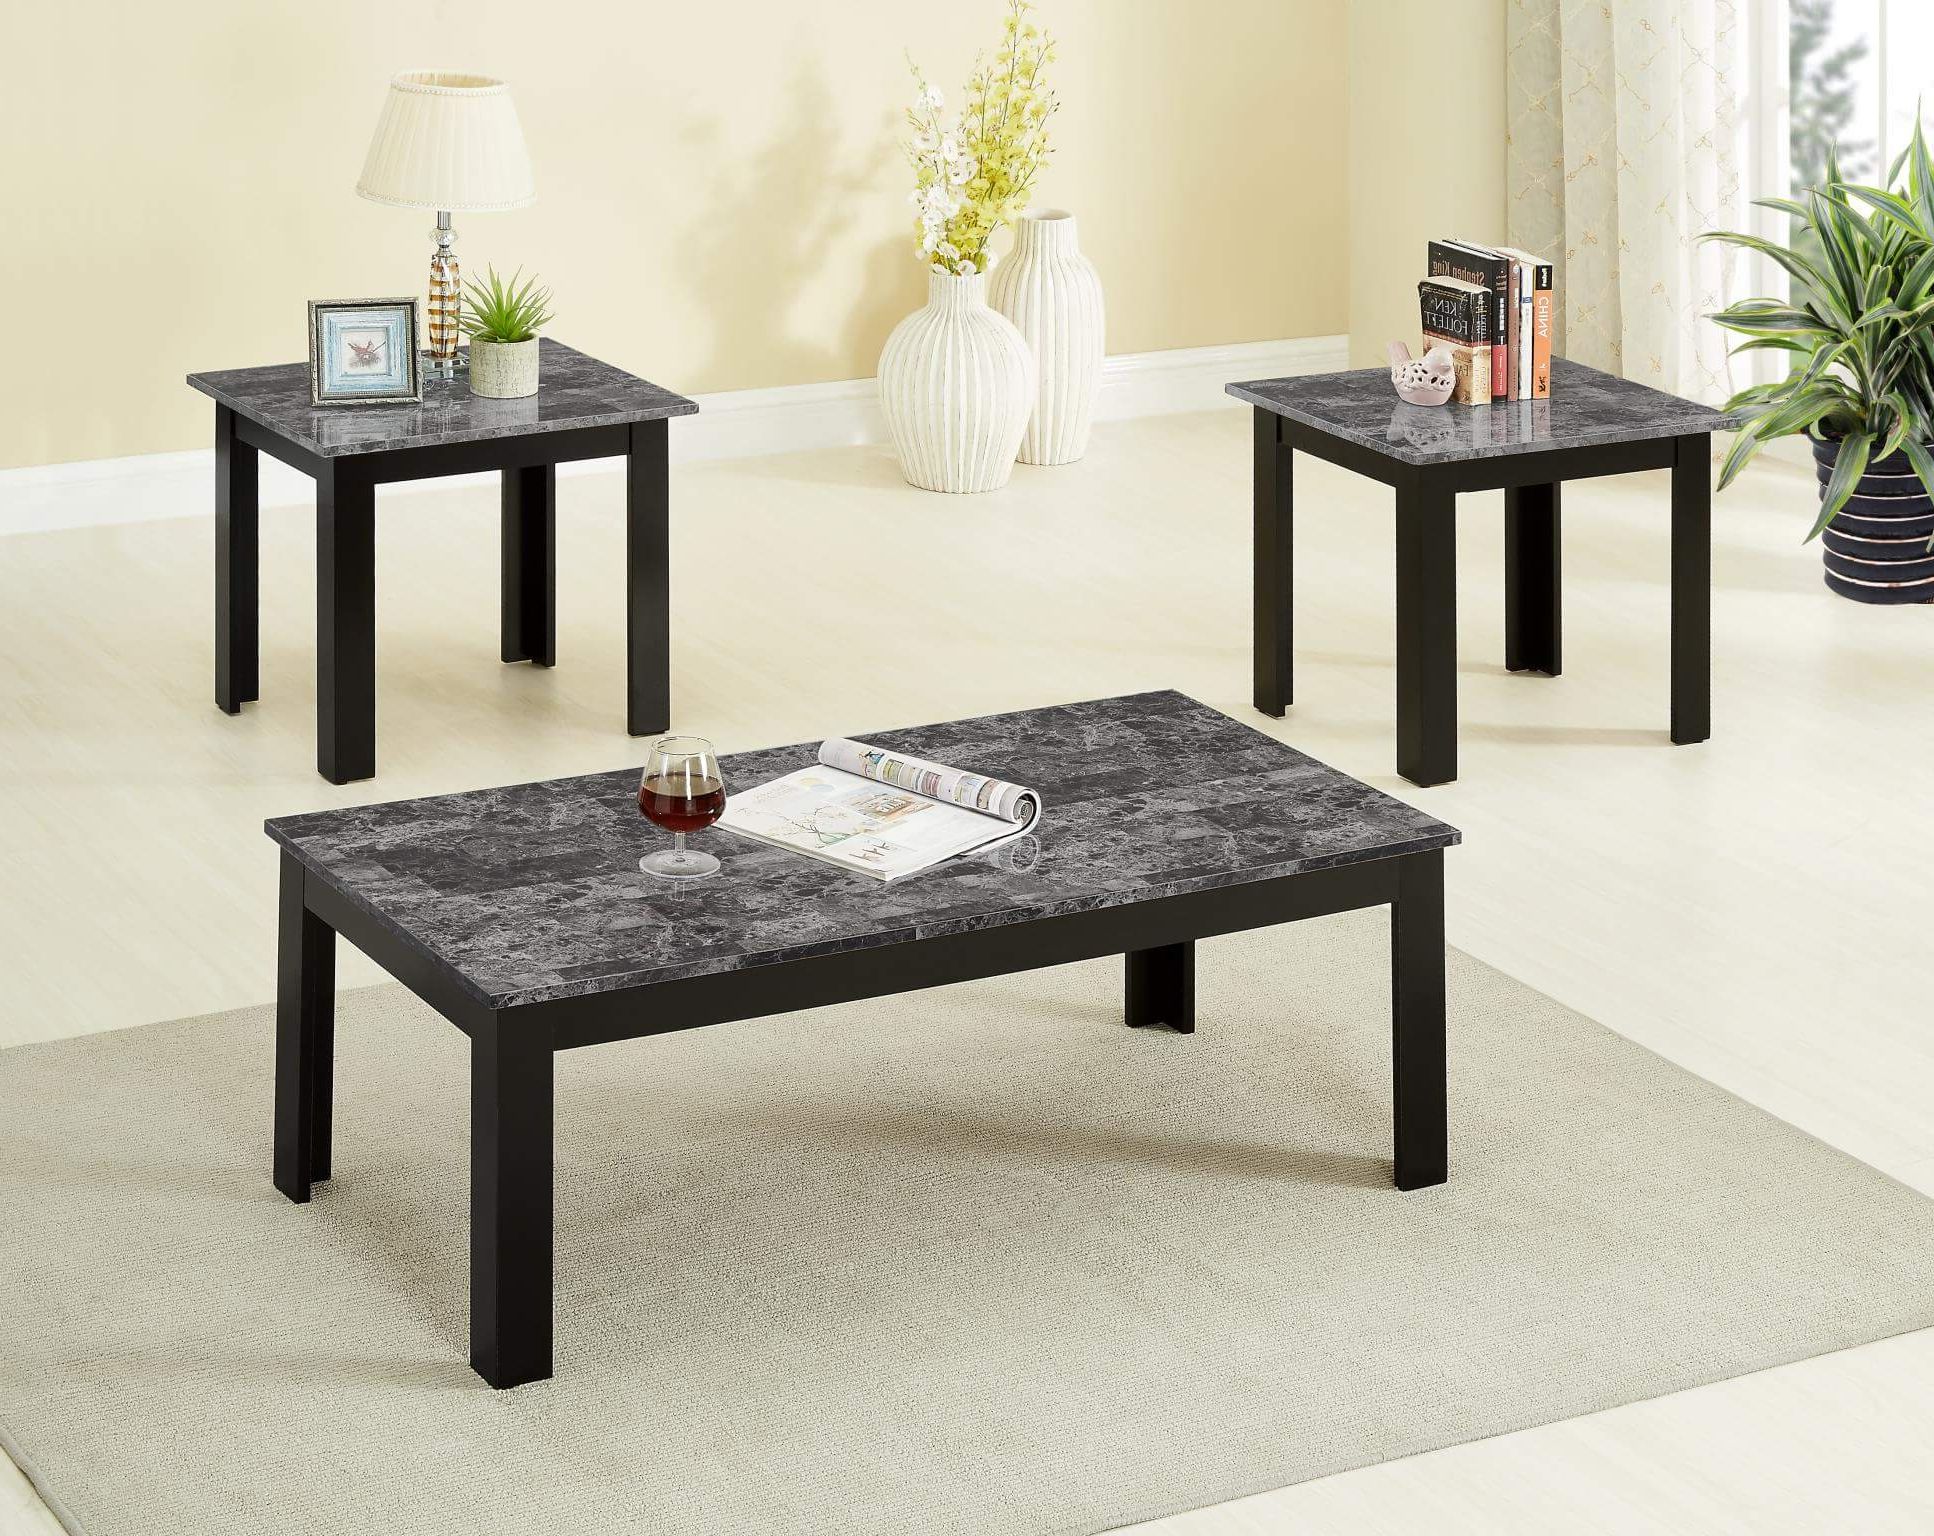 Fashionable 3 Piece Black Faux Marble Coffee And End Table Set Intended For Marble Coffee Tables Set Of  (View 12 of 20)